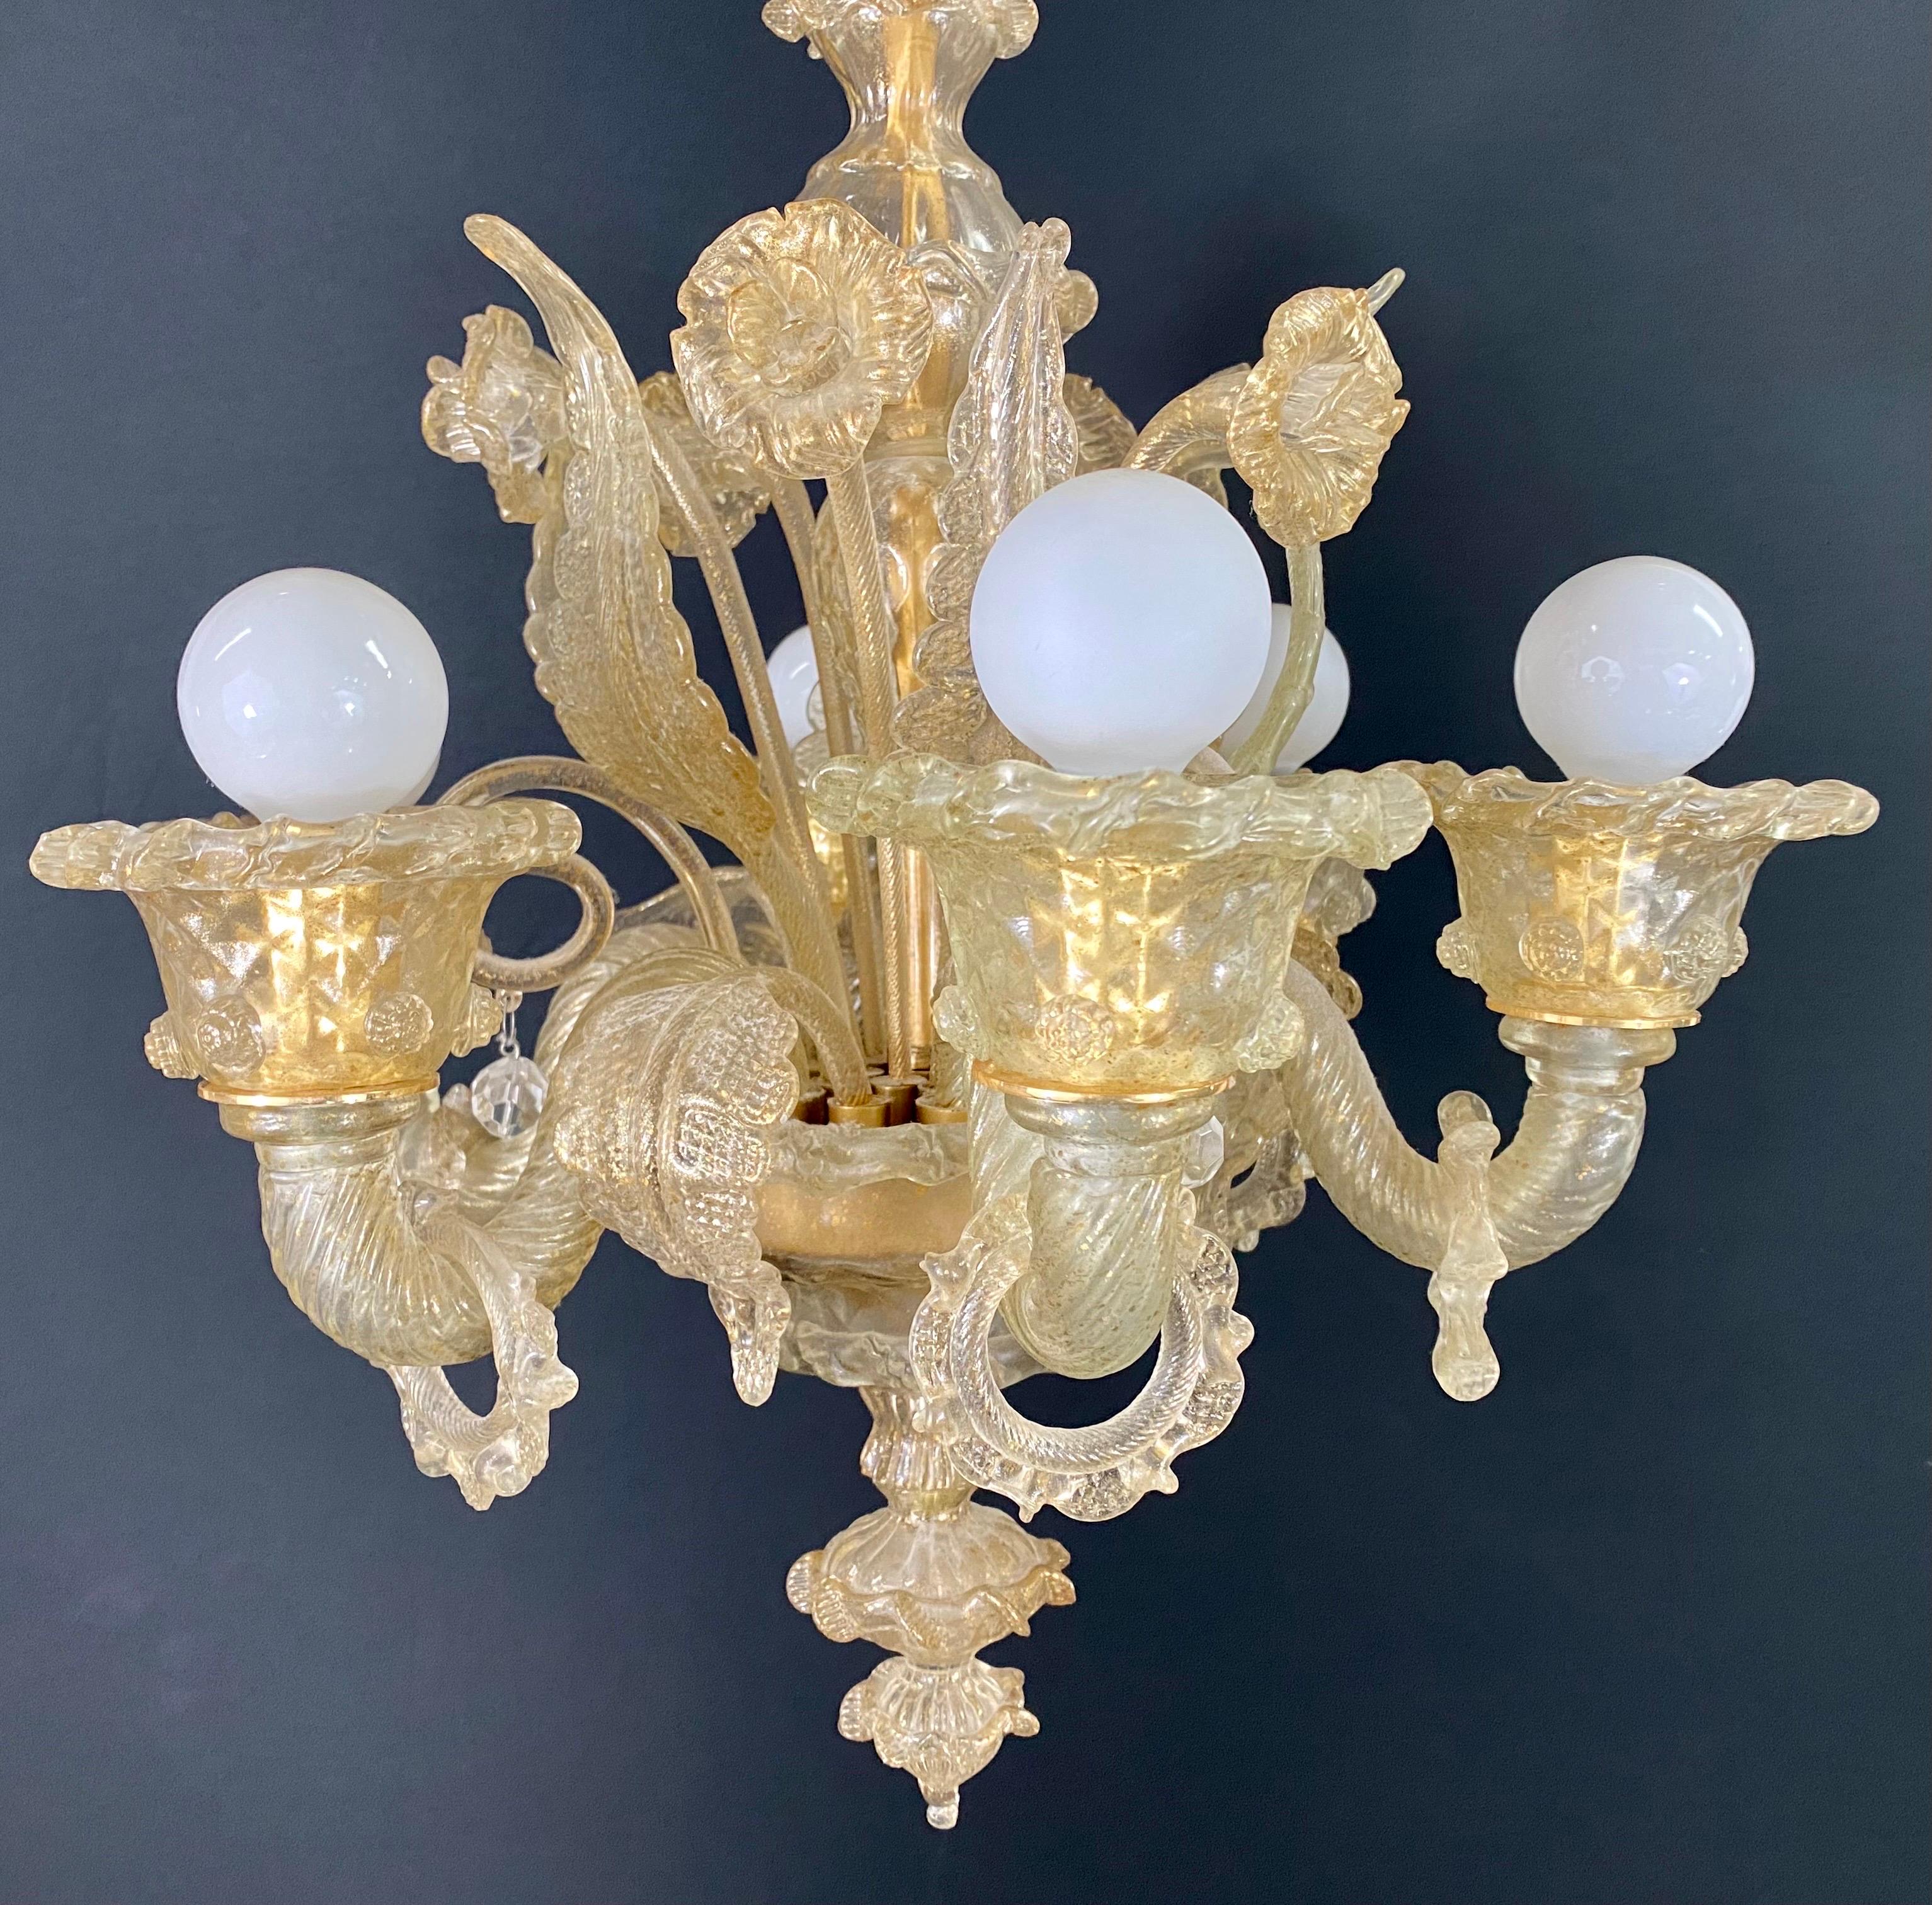 A stunning vintage 1950's all Murano glass chandelier attributed to Compagnia Di Venezia E Murano. The beautiful chandelier is made of quality Murano glass having gold dust making the chandelier look more opulent and elegant. The chandelier is